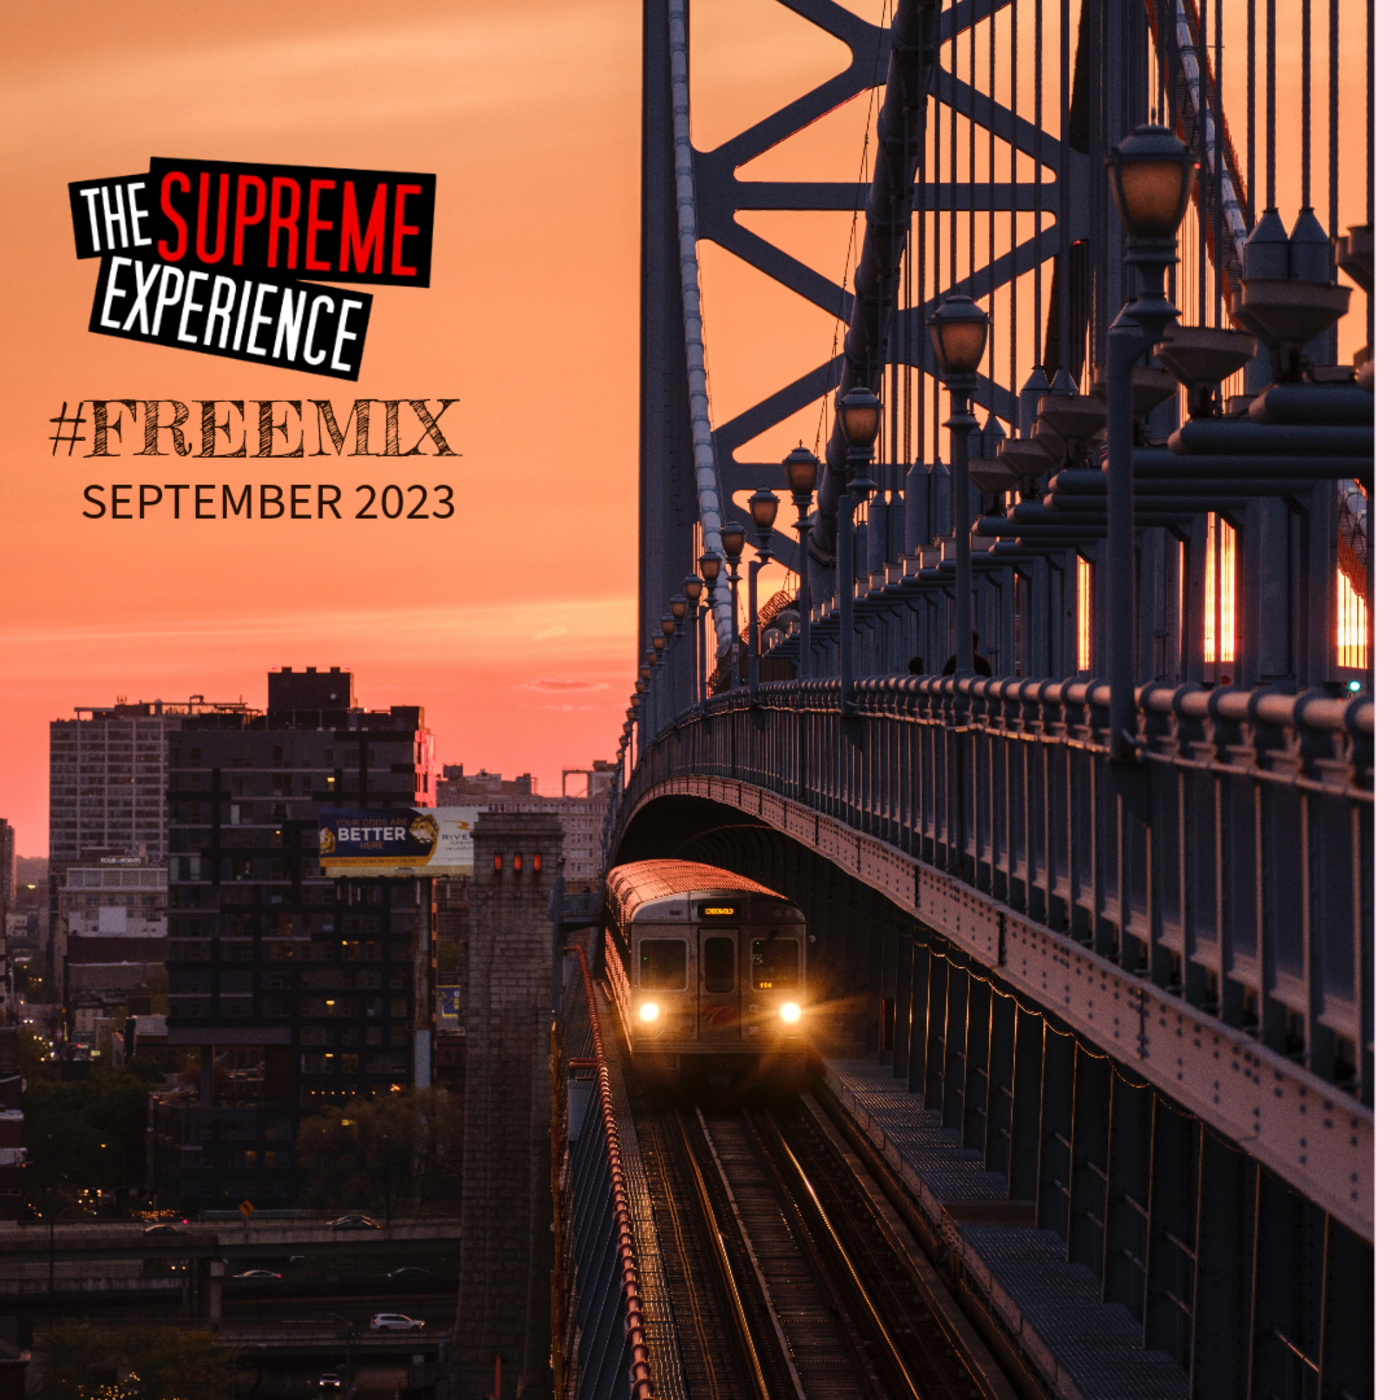 Episode 1: THE SUPREME EXPERIENCE FREEMIX WITH THROWBACK R&B AND HIP HOP FOR SEPTEMBER 2023